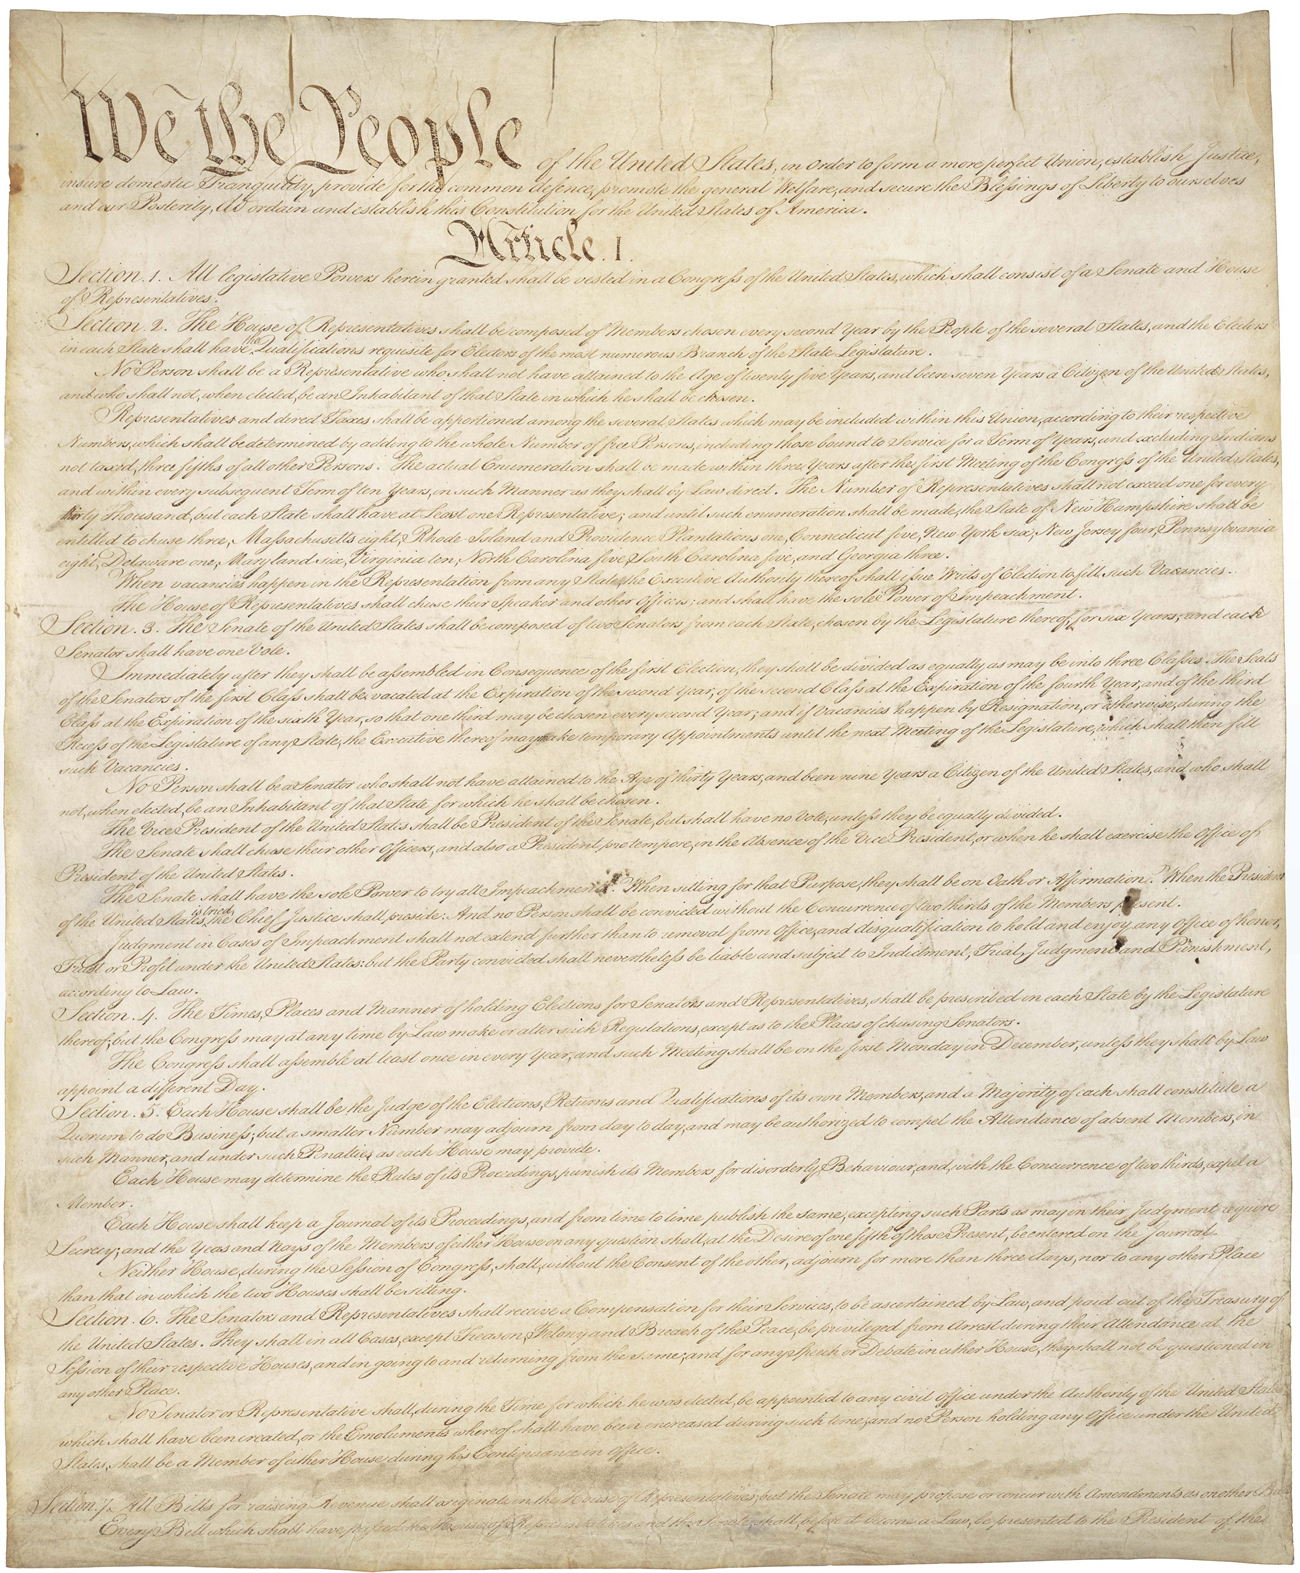 The first of the four pages of the United States Constitution that was adopted on September 17, 1787, by the Constitutional Convention in Philadelphia, Pennsylvania, and ratified by conventions in each U.S. state in the name of 'The People.' 